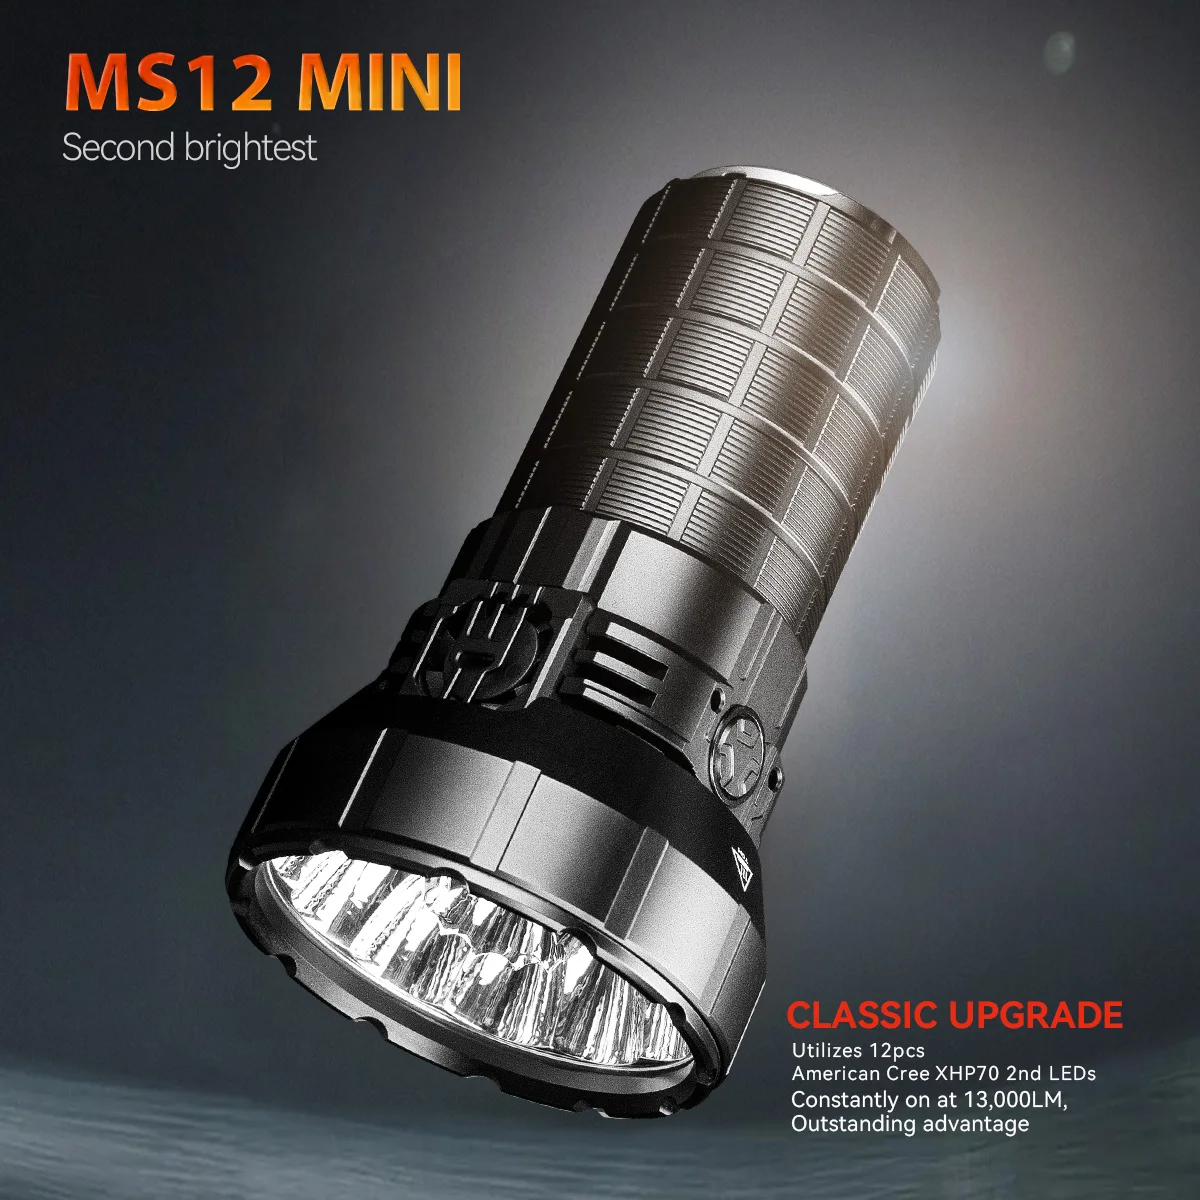 IMALENT MS12 MINI 65000 Lumens Brightest High Power Led Flashlights NEW Self Defense CREE XHP70 Rechargeable Lamp Free Shipping